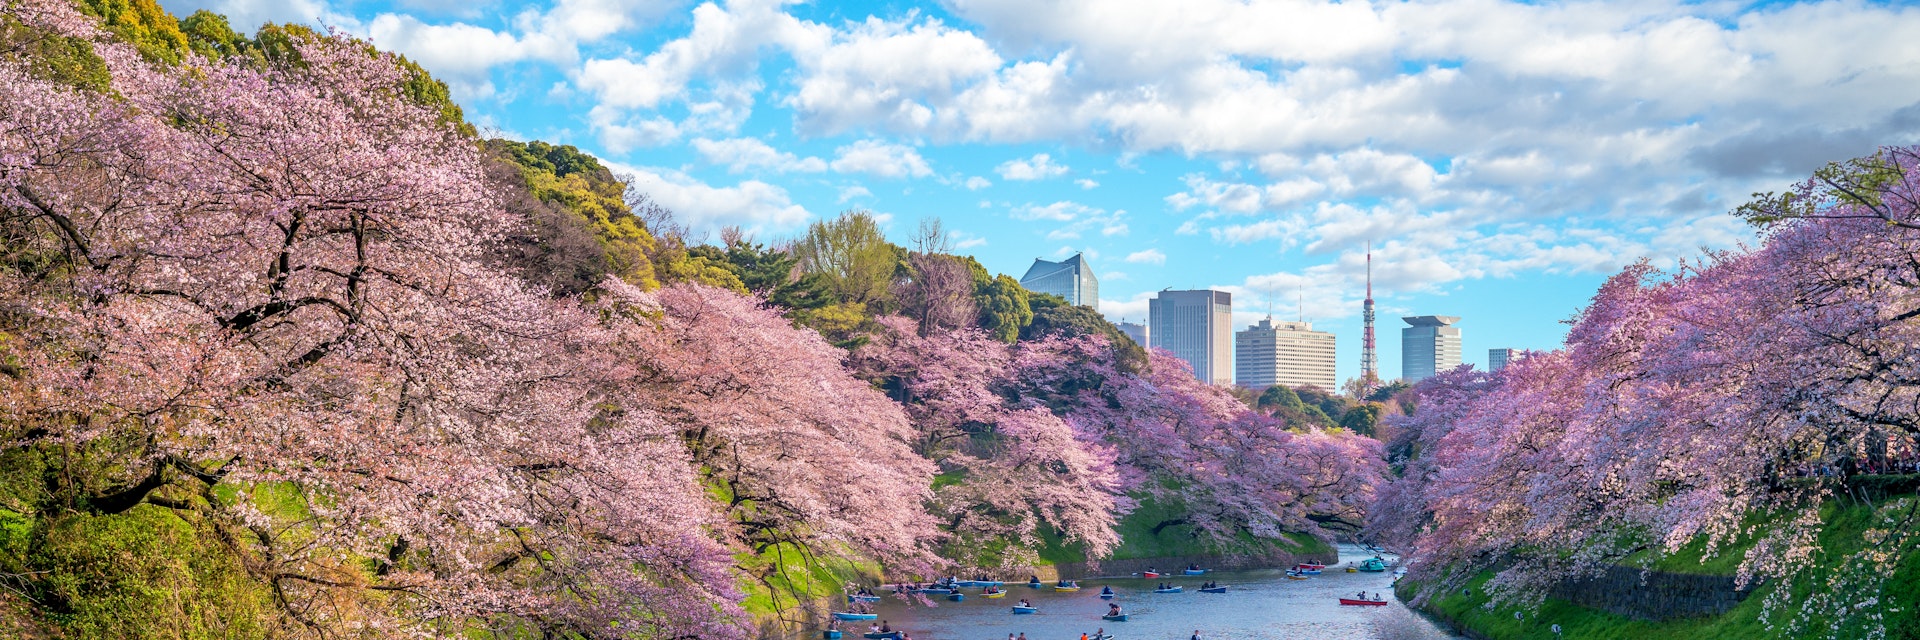 Many people paddle in boats near cherry blossoms at Chidorigafuchi Green Way in Tokyo.
